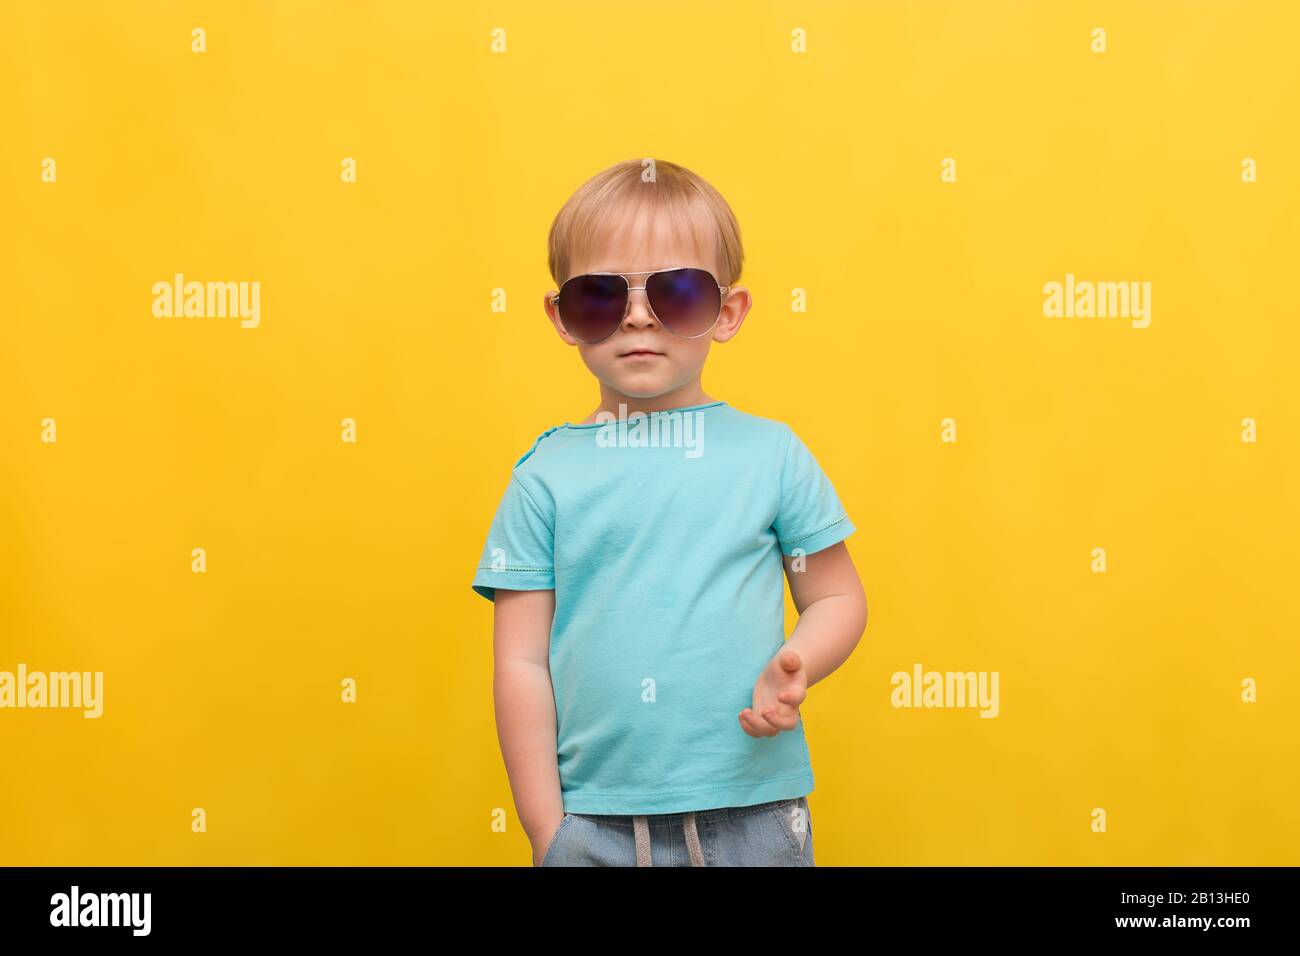 Child portrait of a 3 years old blond boy in a blue T-shirt and sunglasses on a bright yellow spring summer background with place for text. Attracting Stock Photo